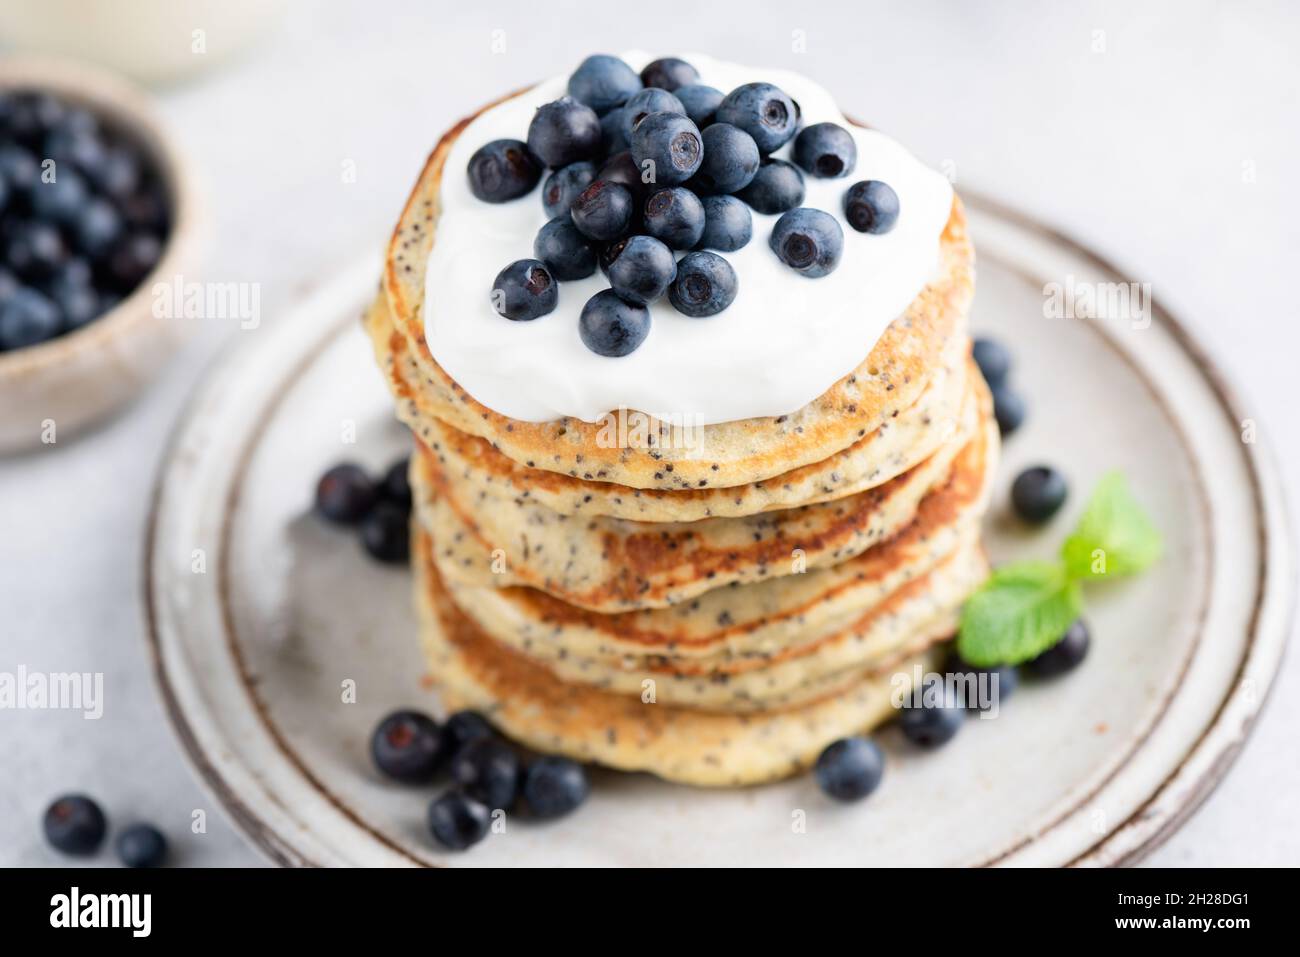 Chia seed pancakes with yogurt and blueberries on plate closeup view Stock Photo